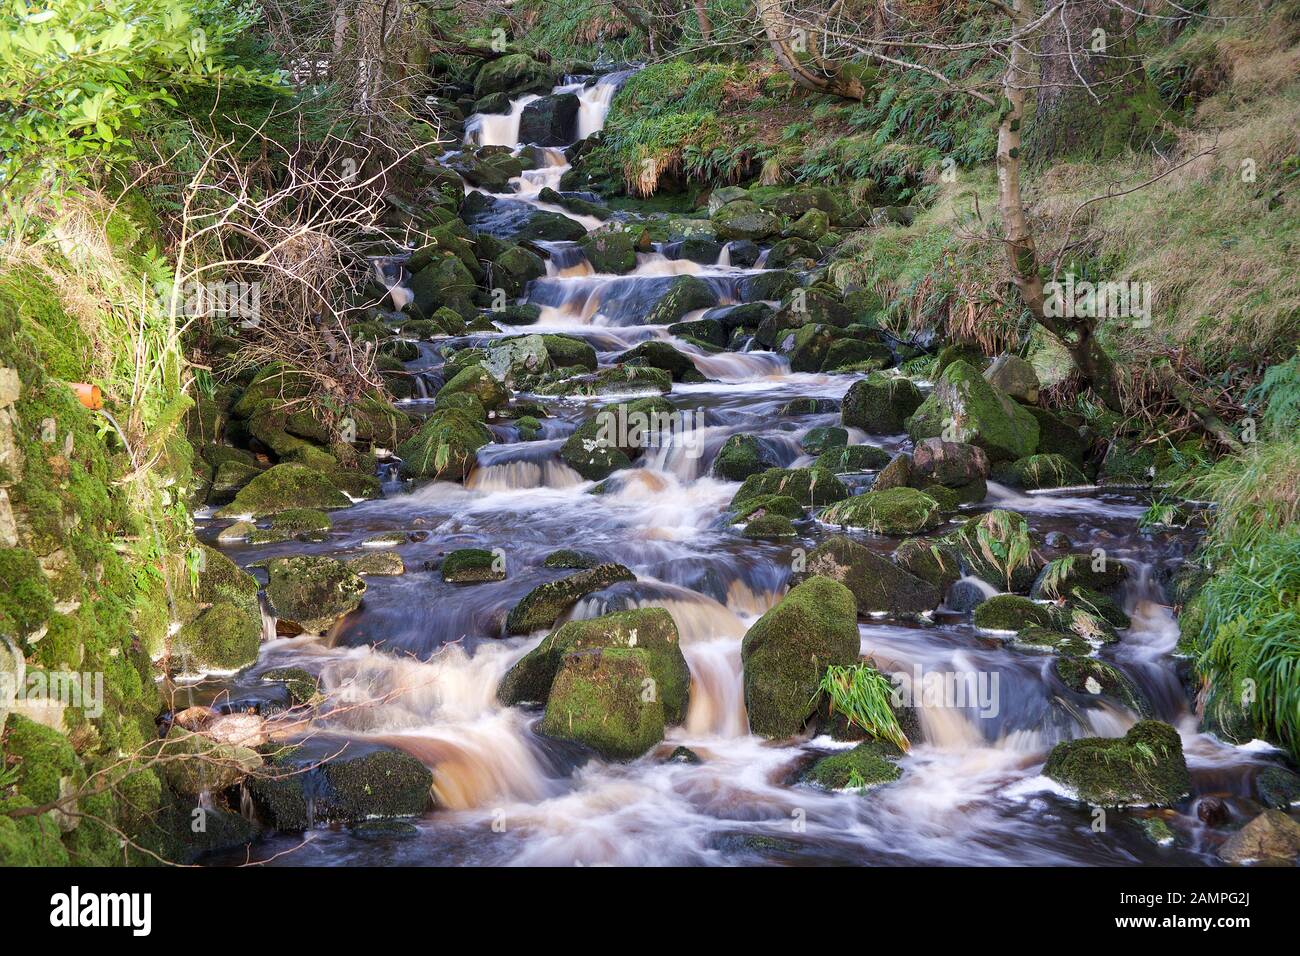 Slow exposure shot of white water rapids on a river in County Wicklow, Ireland. Stock Photo